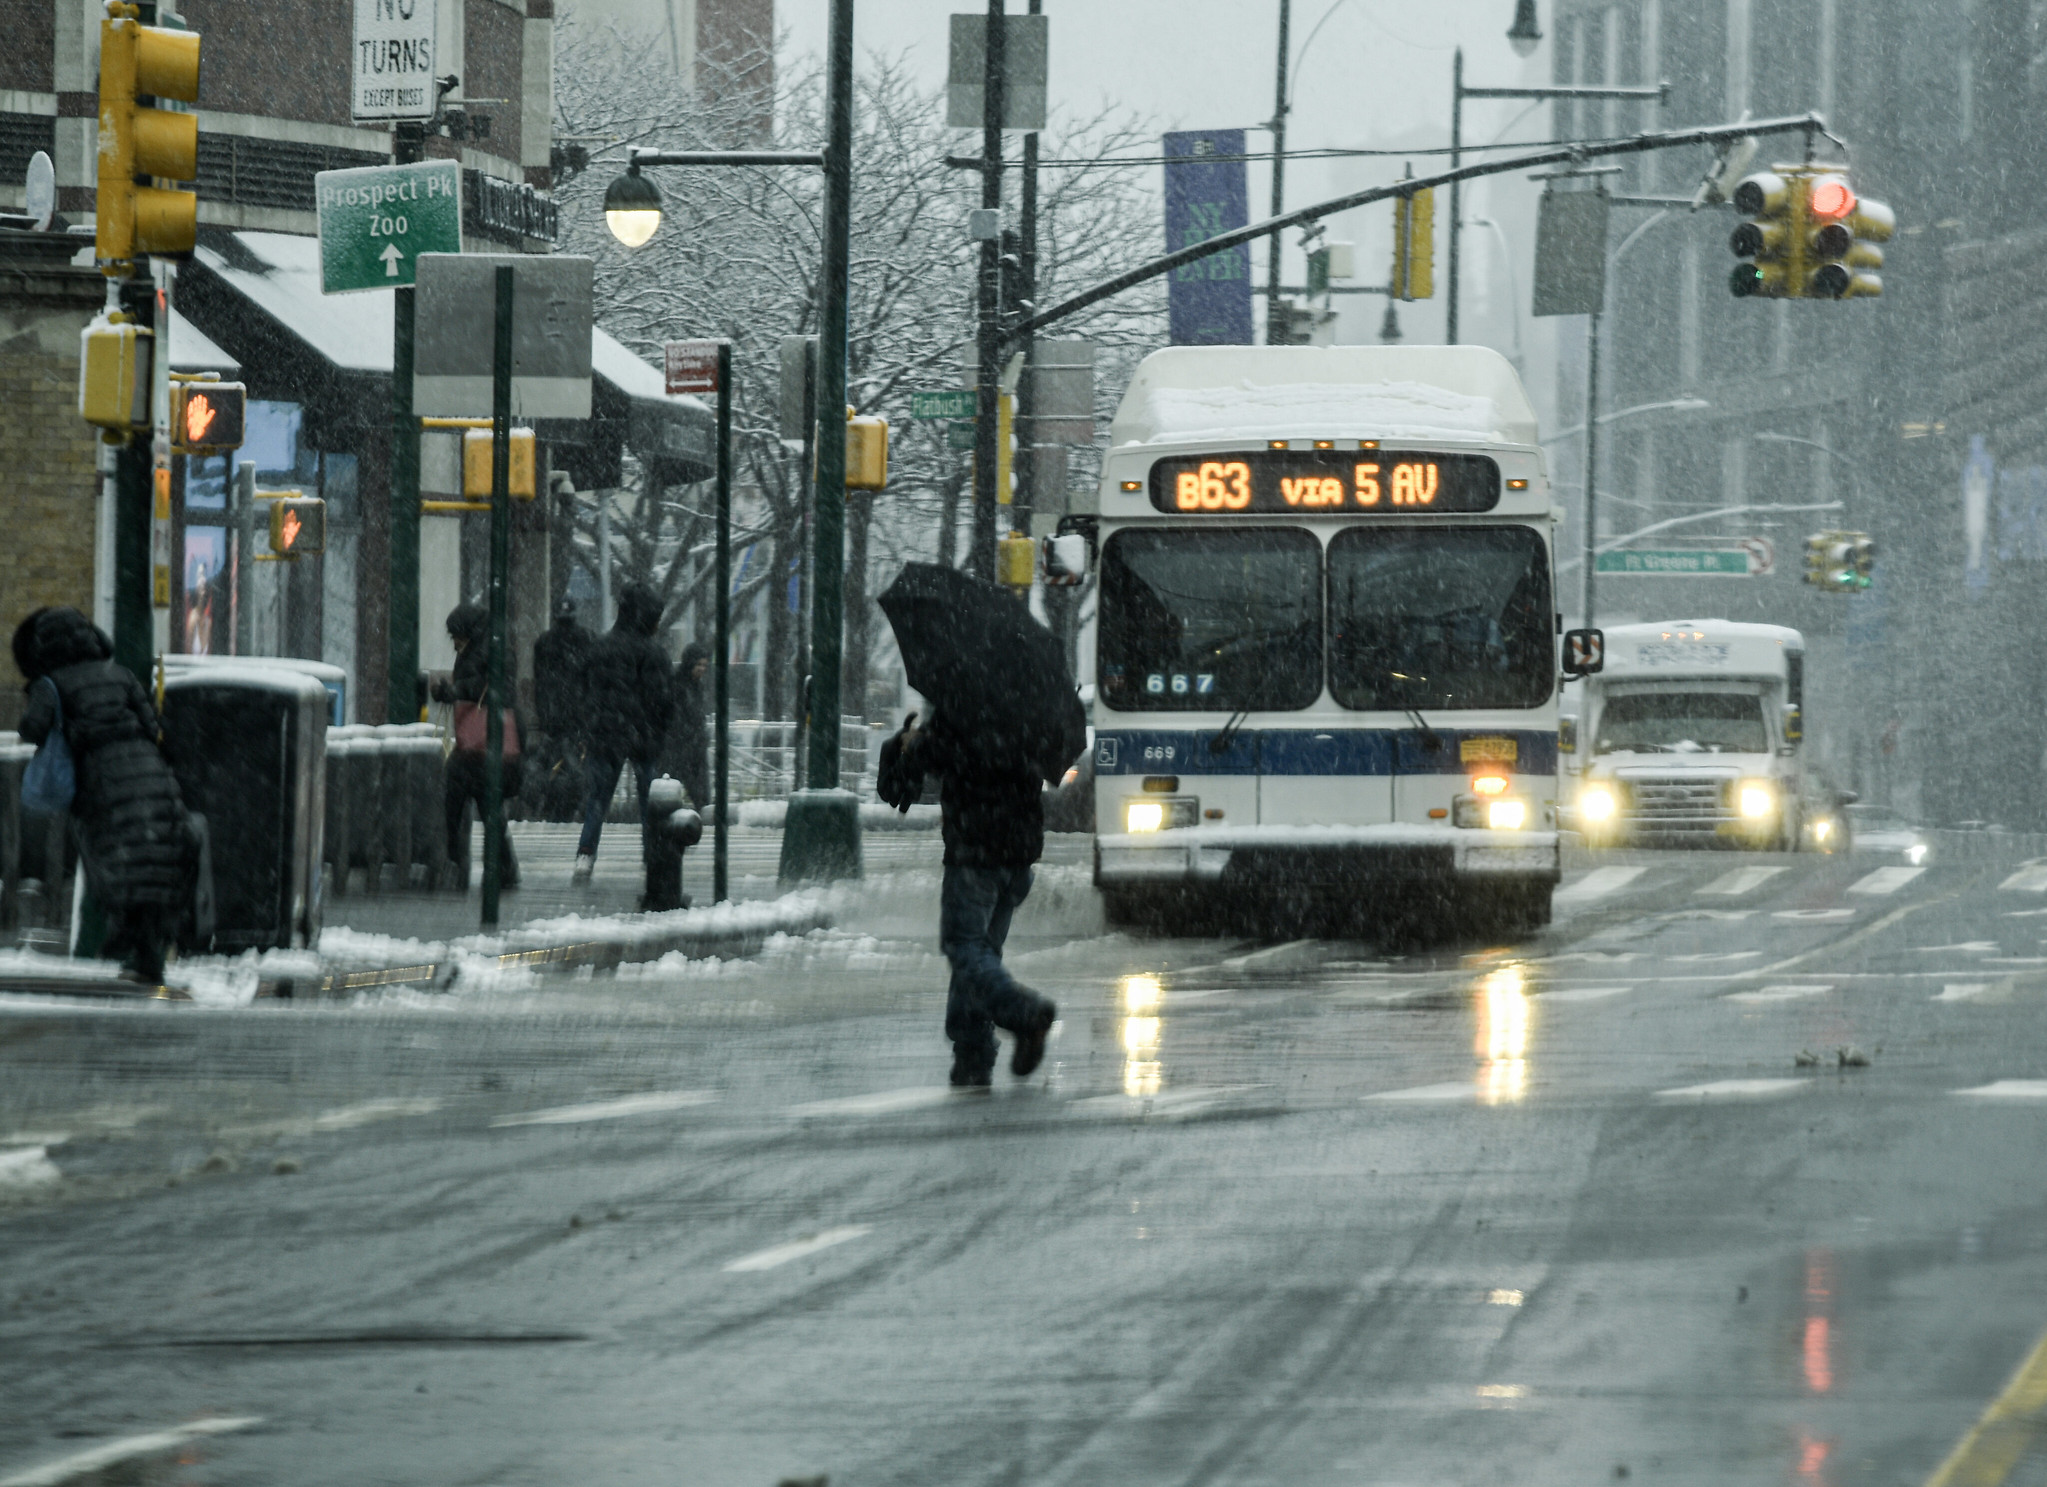 A B63 bus in the snow